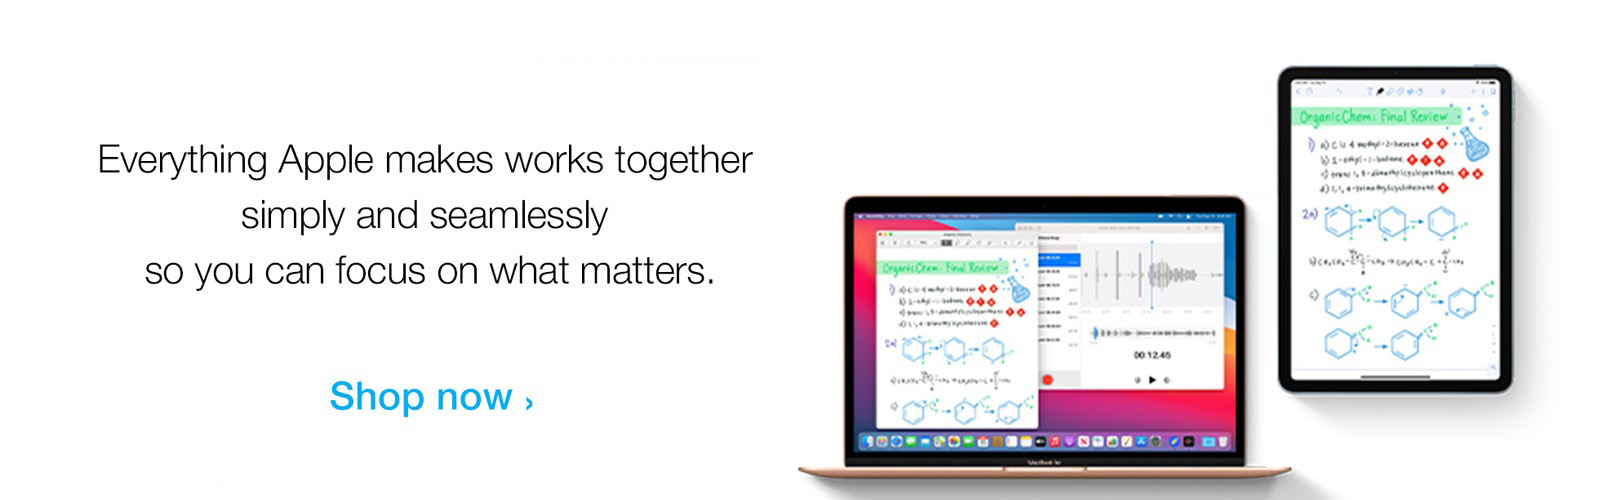 Everything Apple Makes Works together